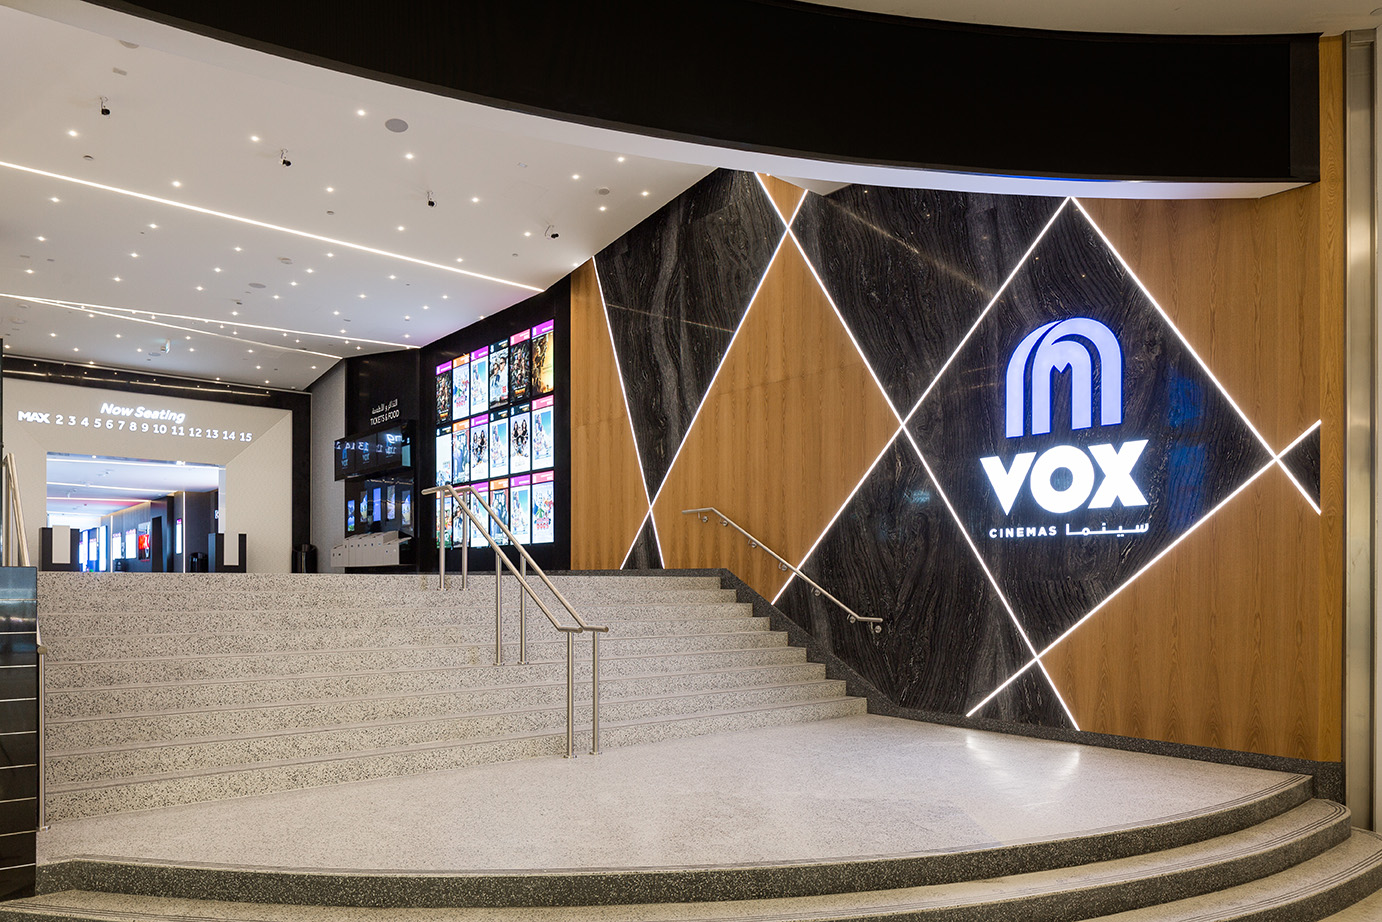 Havelock One Completes Fit Out For Vox Cinemas At Nakheel Mall